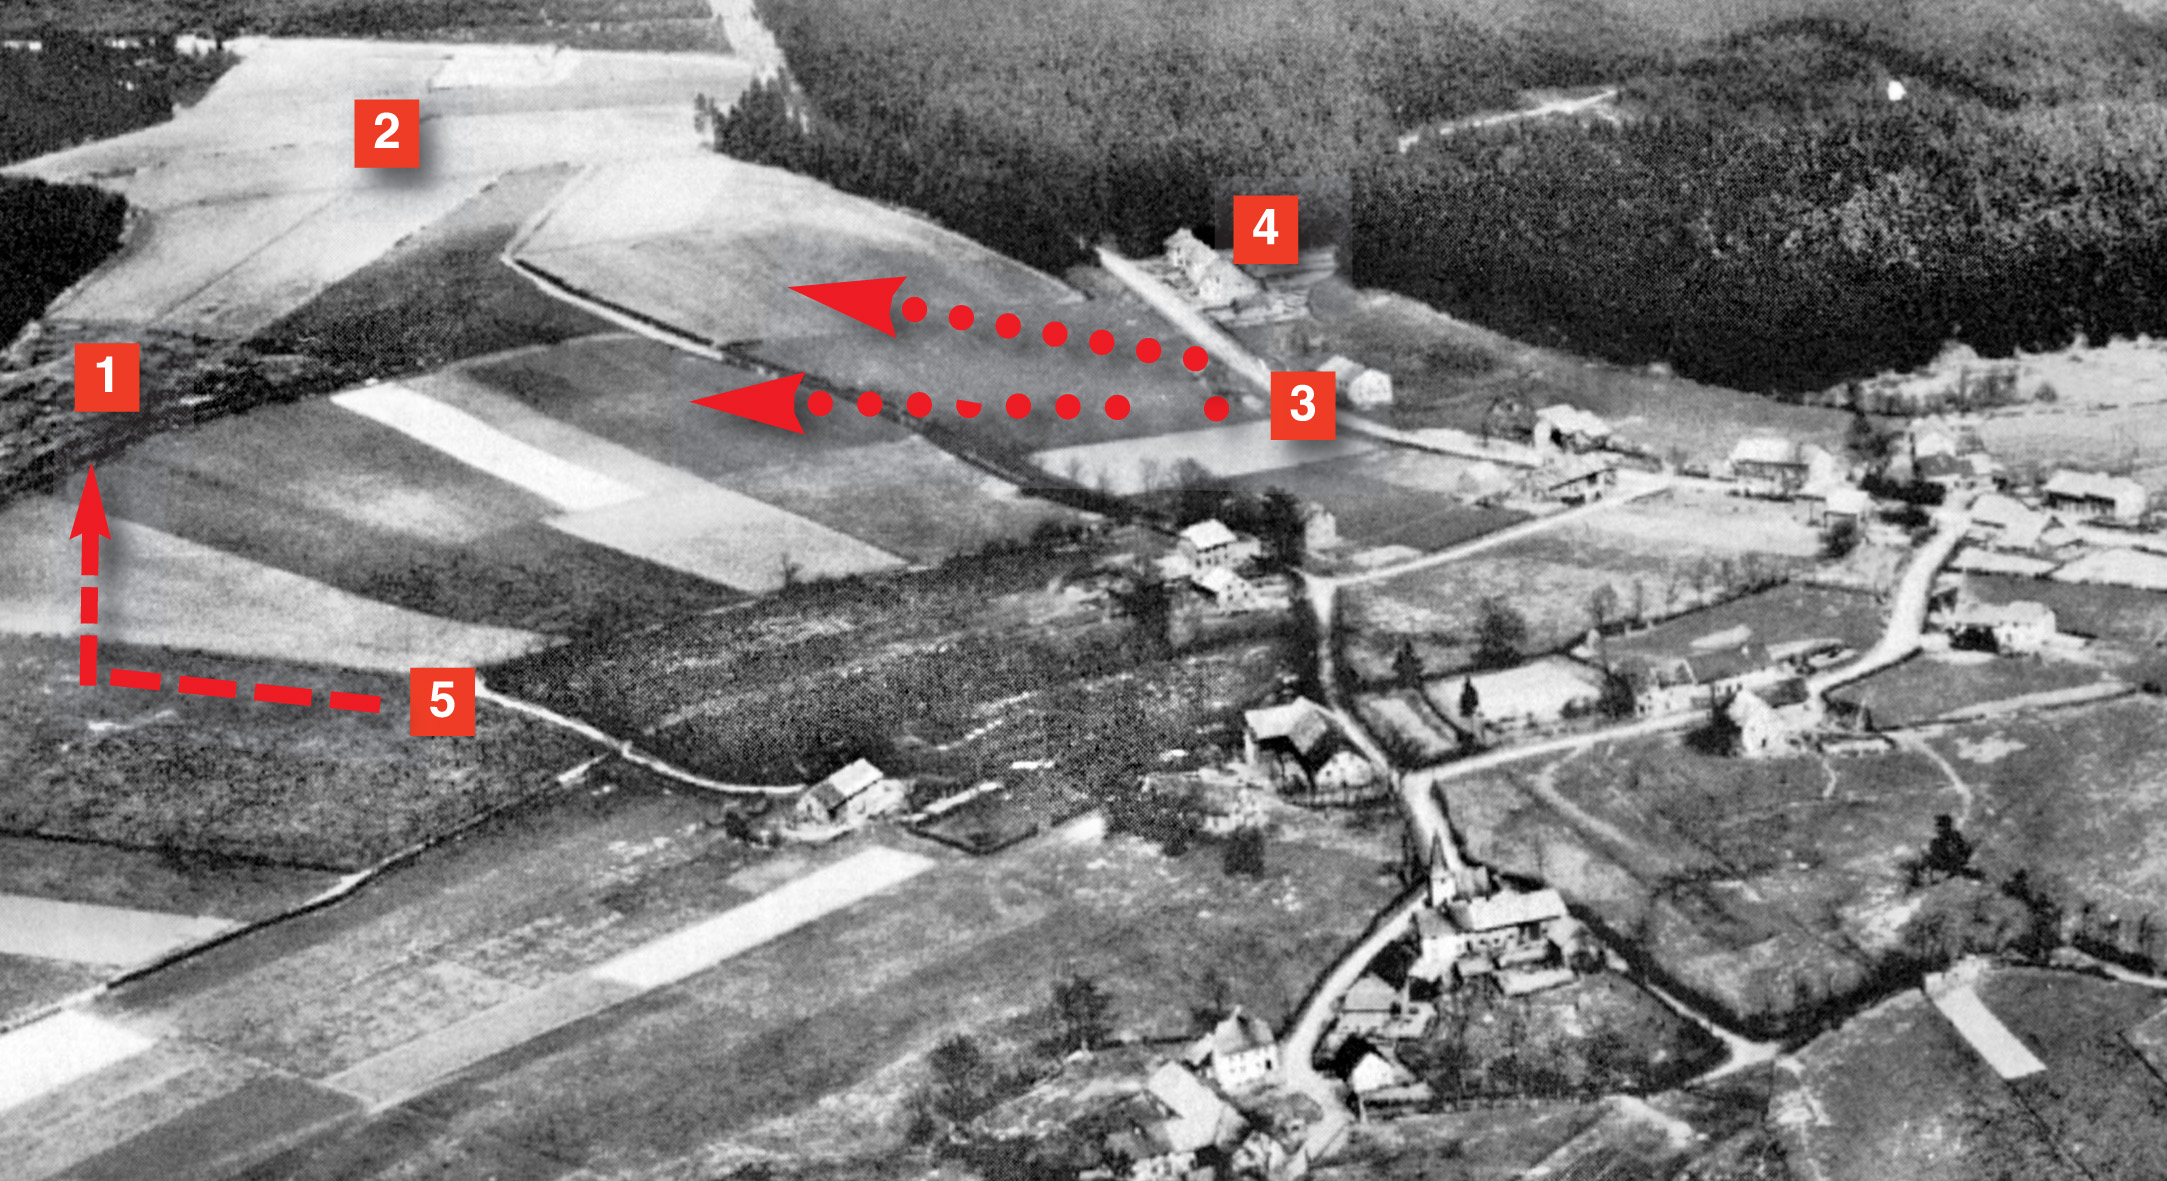 This aerial photo was taken after the battle for Lanzerath concluded. The American positions were located between numbers one and two, while number three indicates the direction of the initial German attacks in the area. Number four identifies the house from which the young Belgian girl emerged to talk with the Germans, and number five indicates the direction of the final German flanking attack against the Americans.